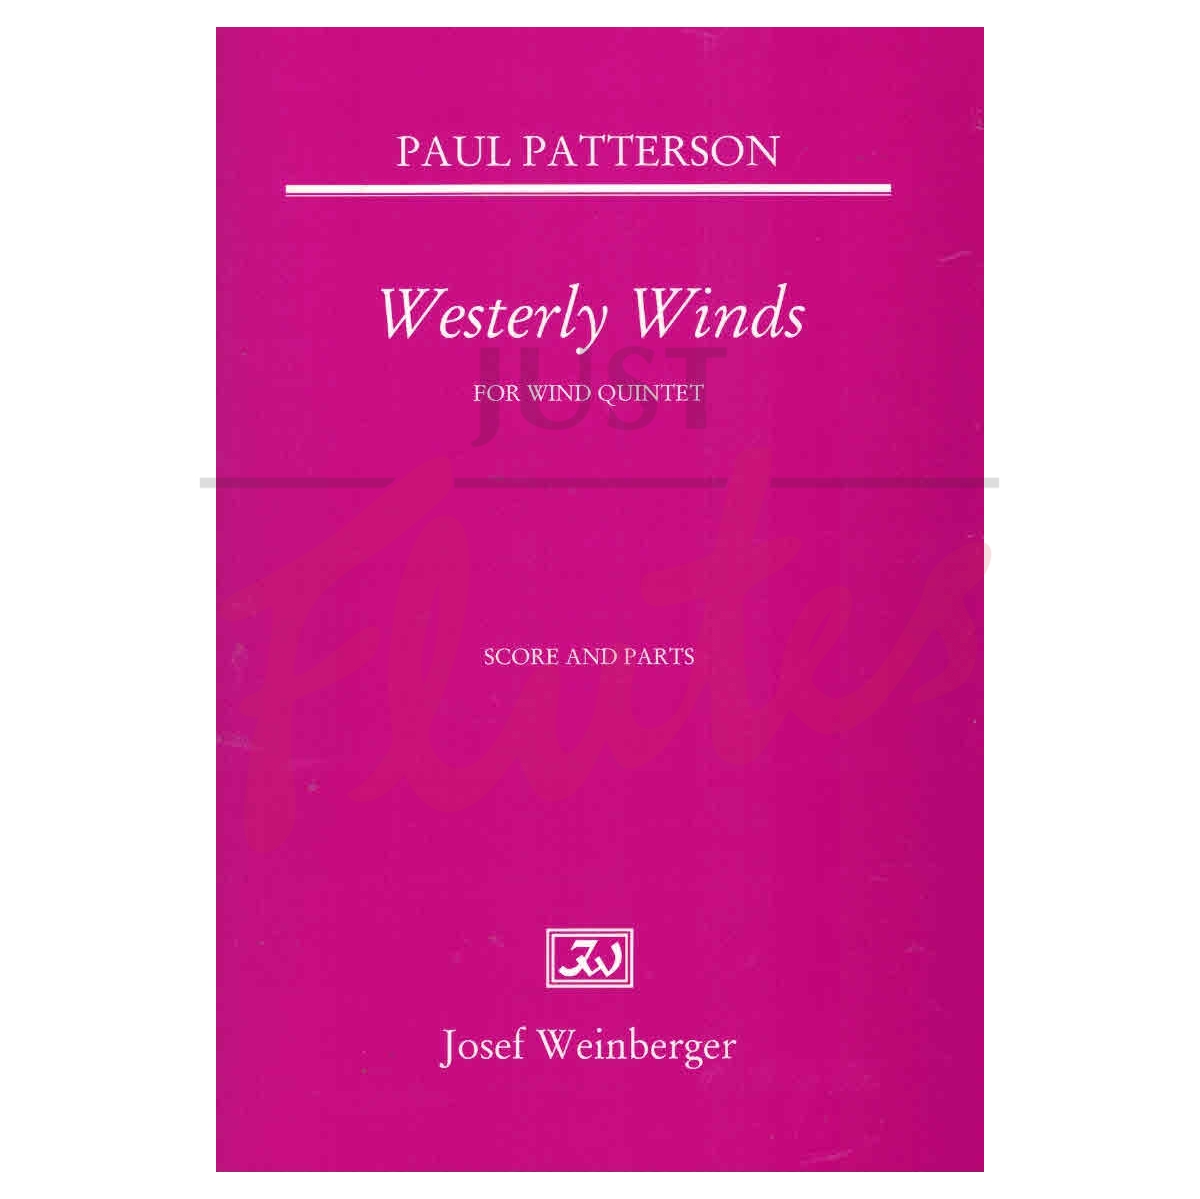 Westerly Winds for Wind Quintet